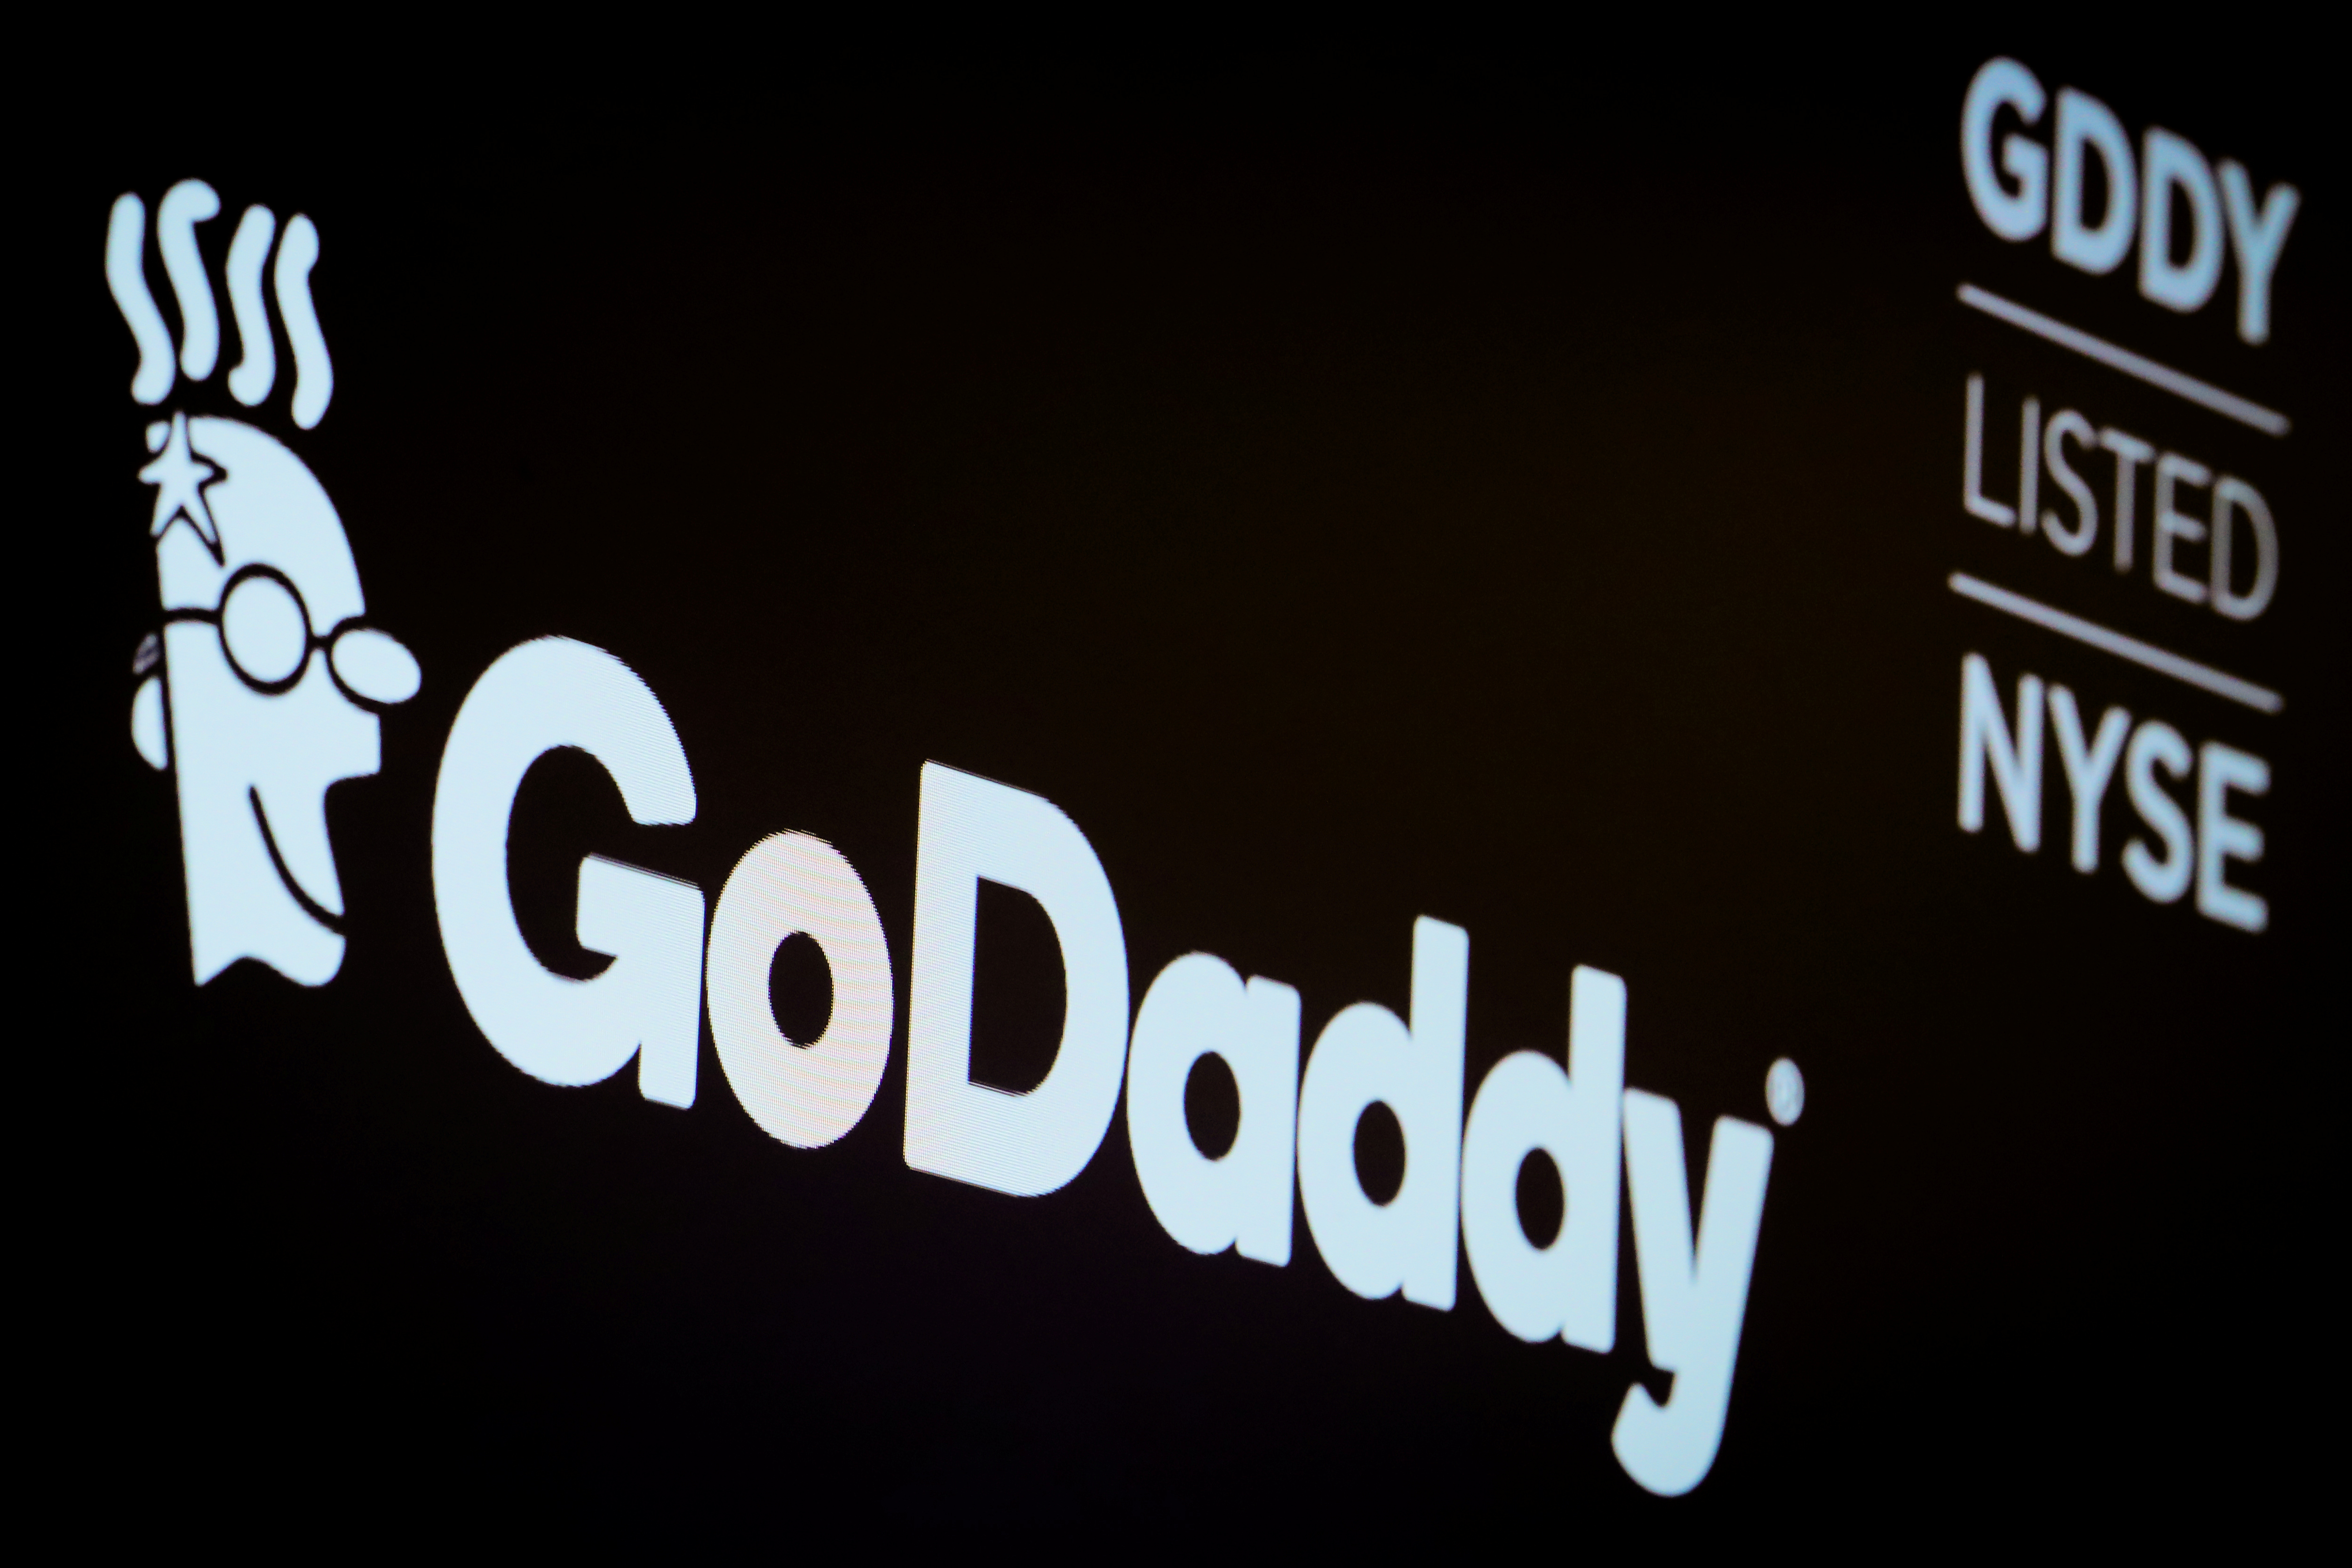 The company logo and ticker for GoDaddy Inc. is displayed on a screen on the floor of the NYSE in New York